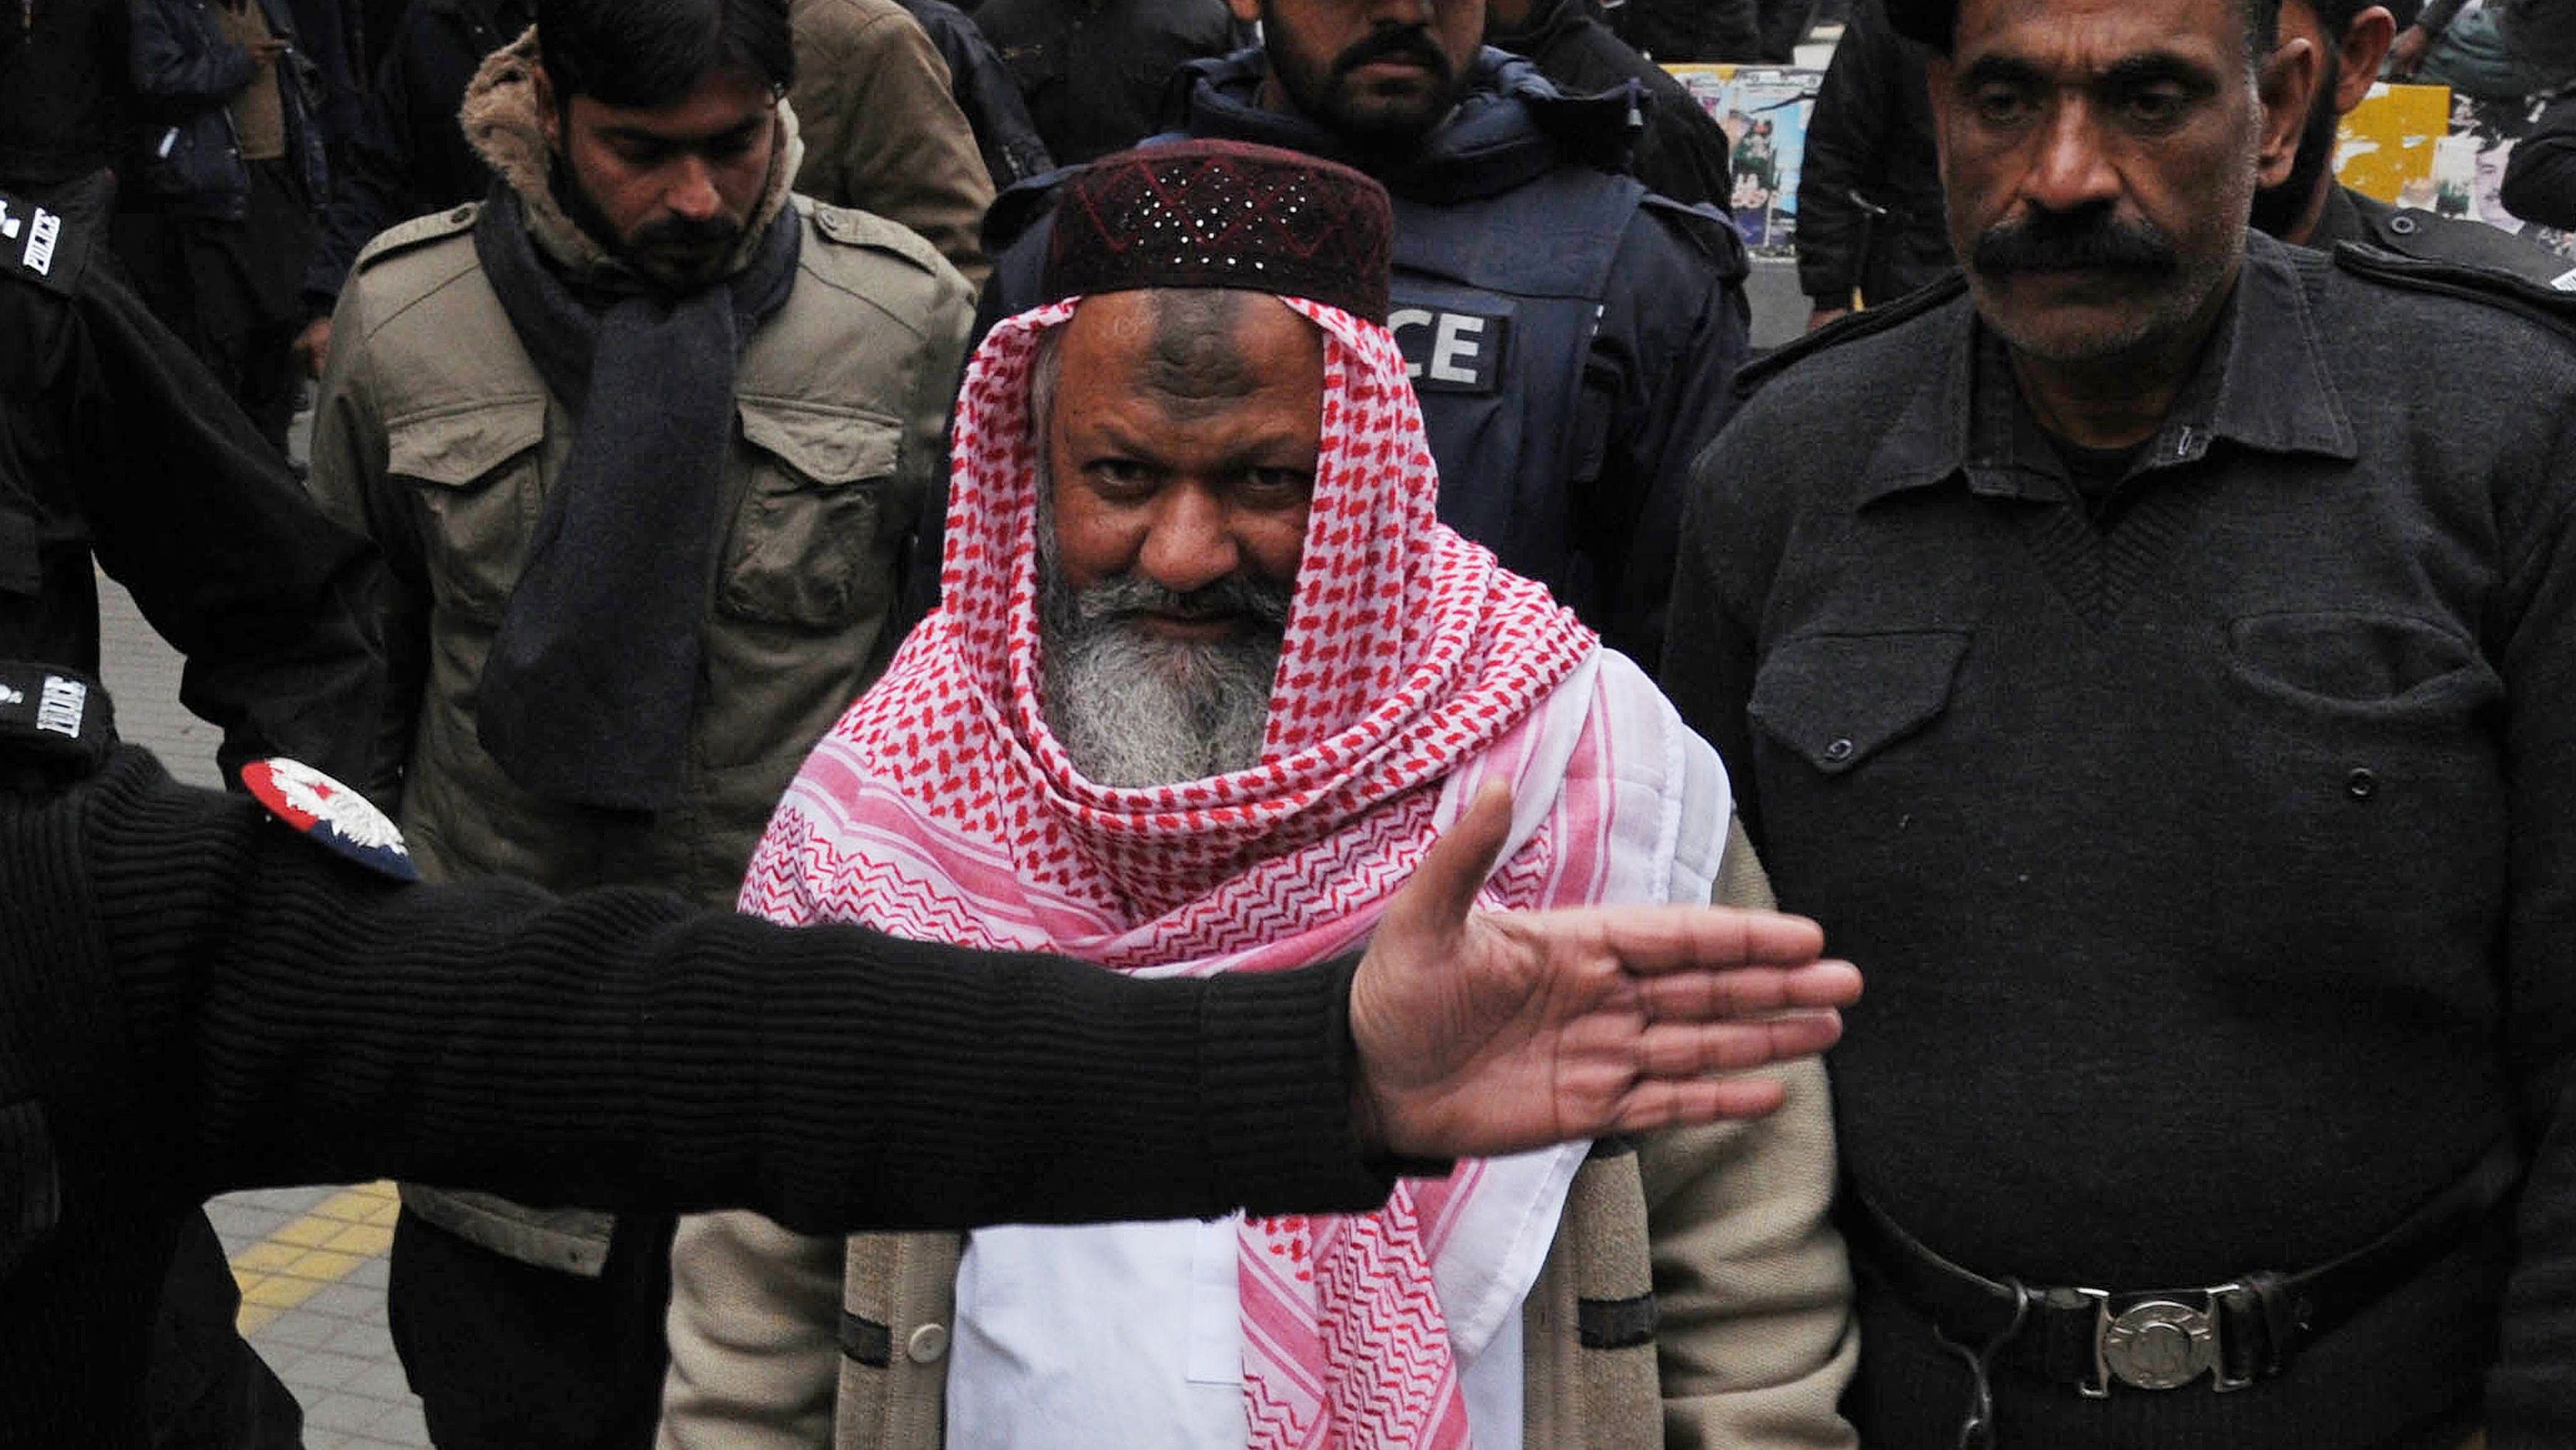 Pakistani police escort Malik Ishaq as he arrives at the high court in Lahore on December 22, 2014.